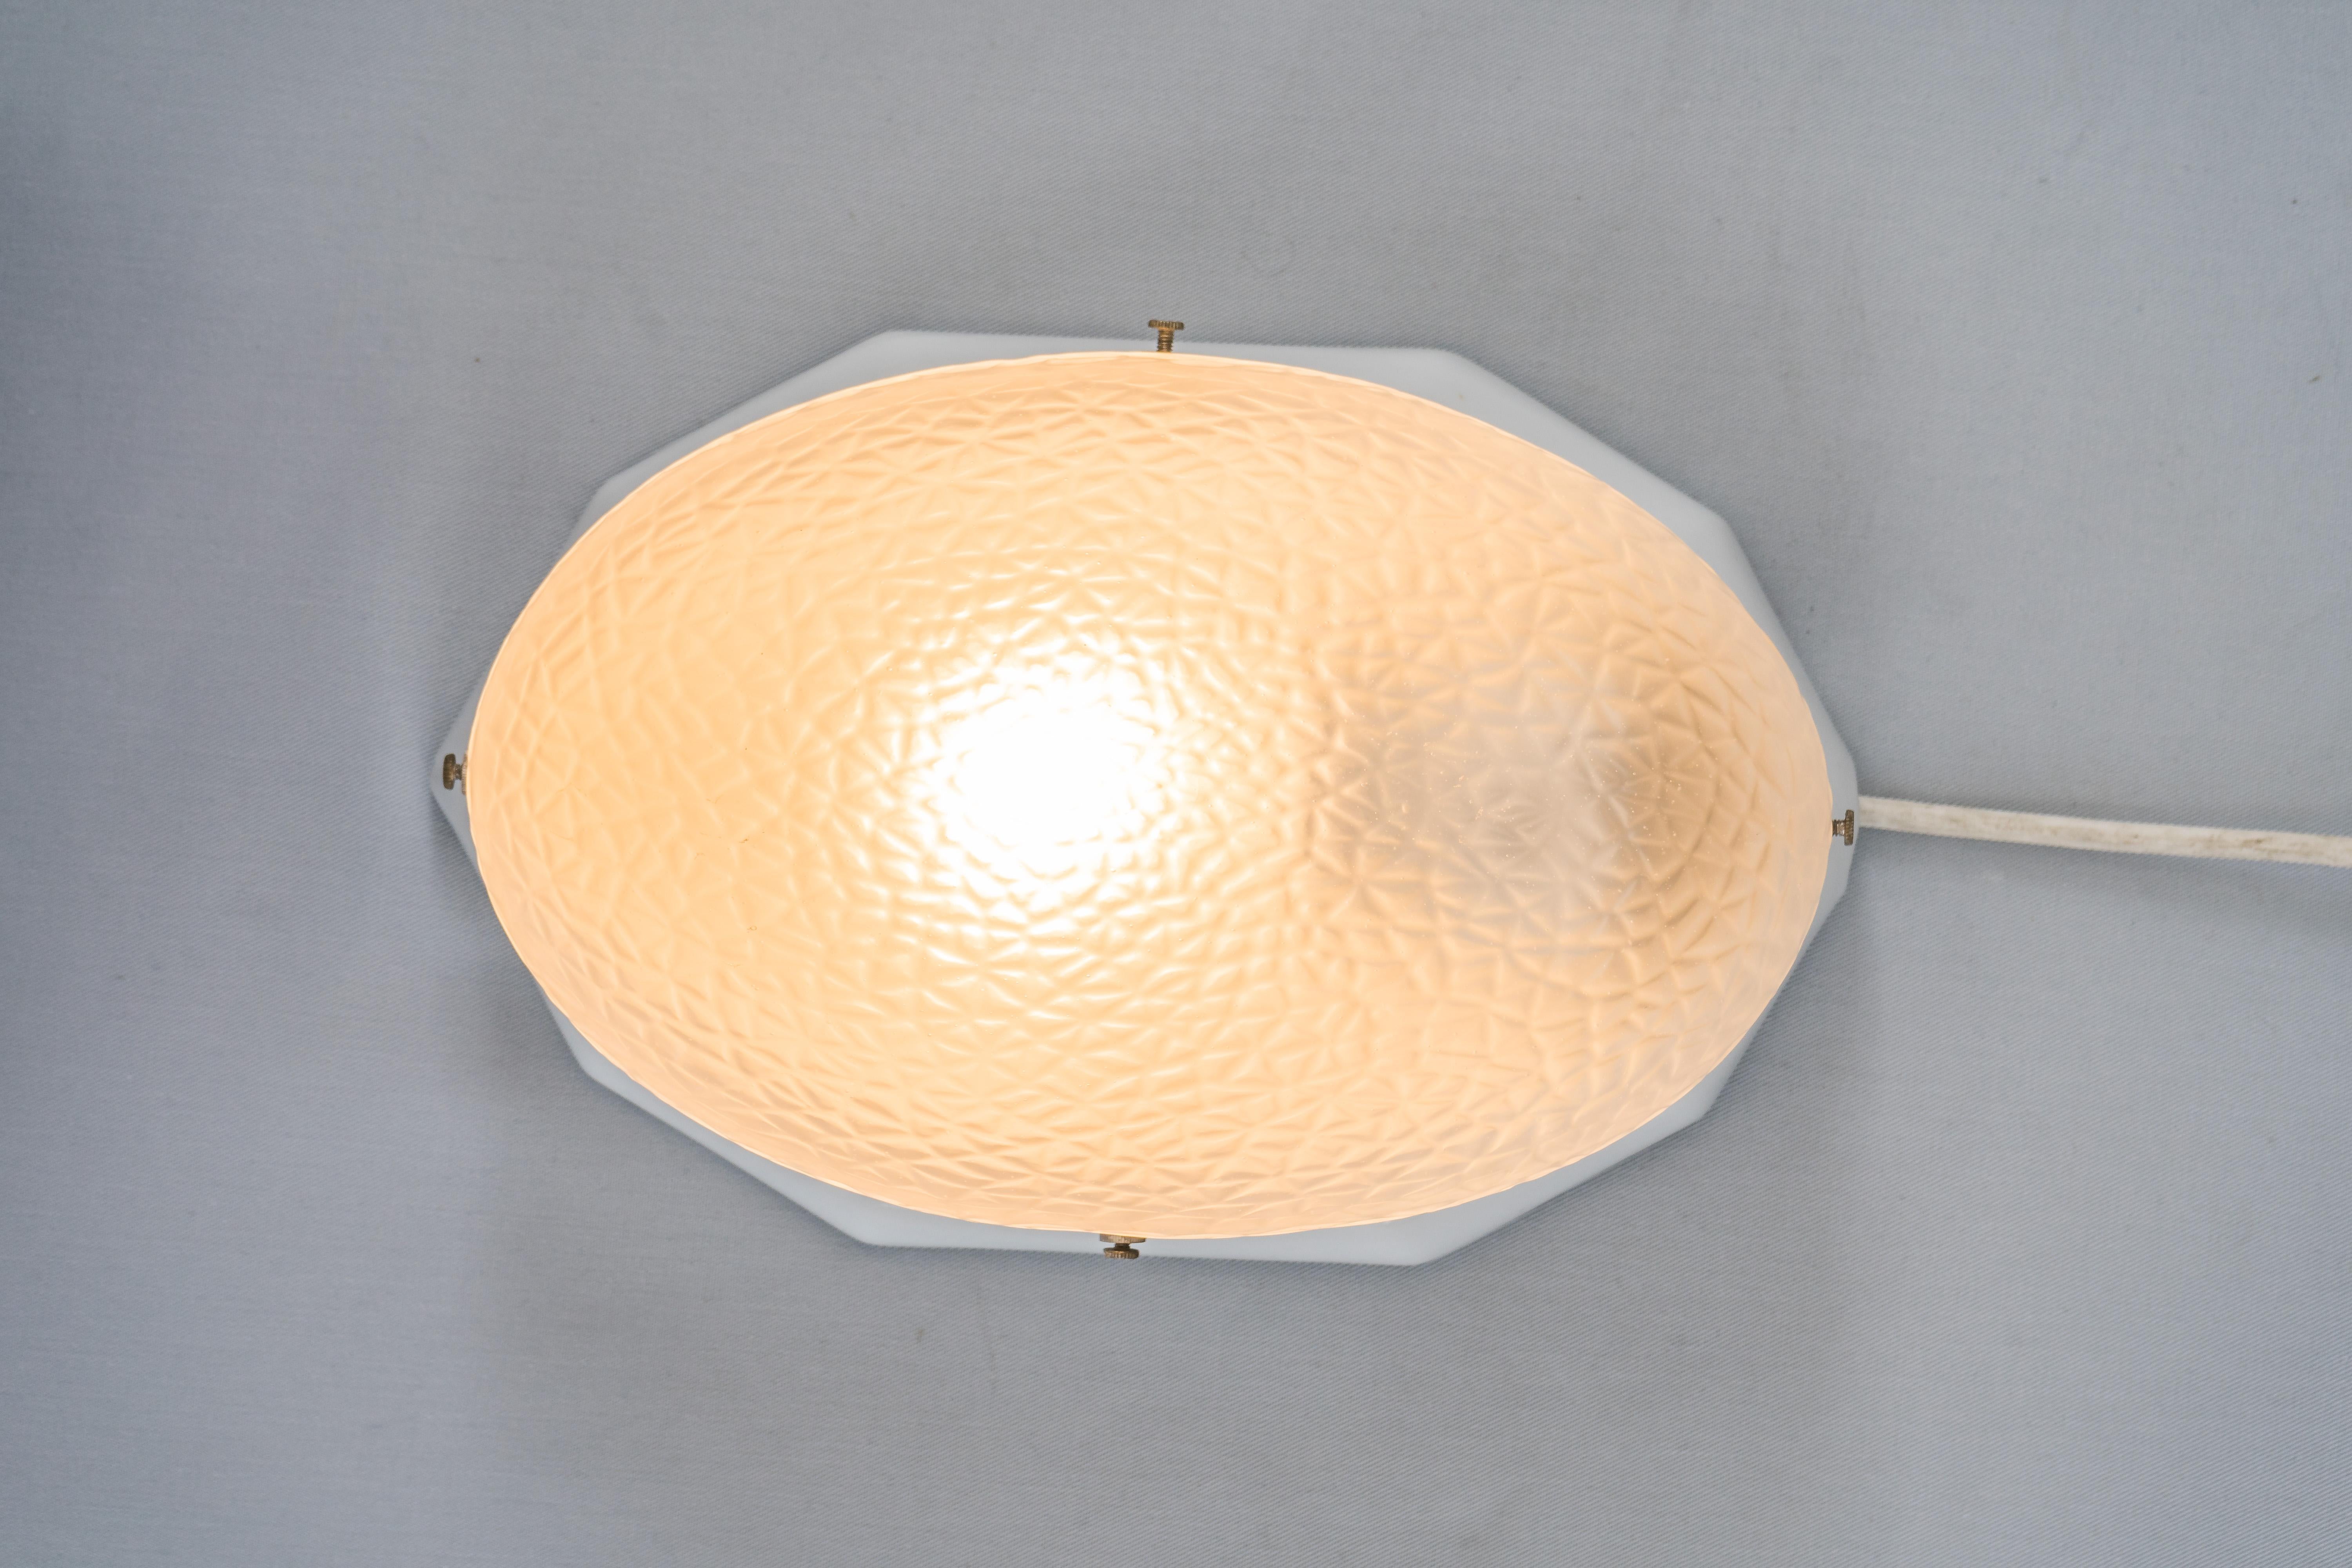 White Oval Porcelain Wall or Ceiling Lamp with Original Glass Shade, circa 1920s For Sale 5